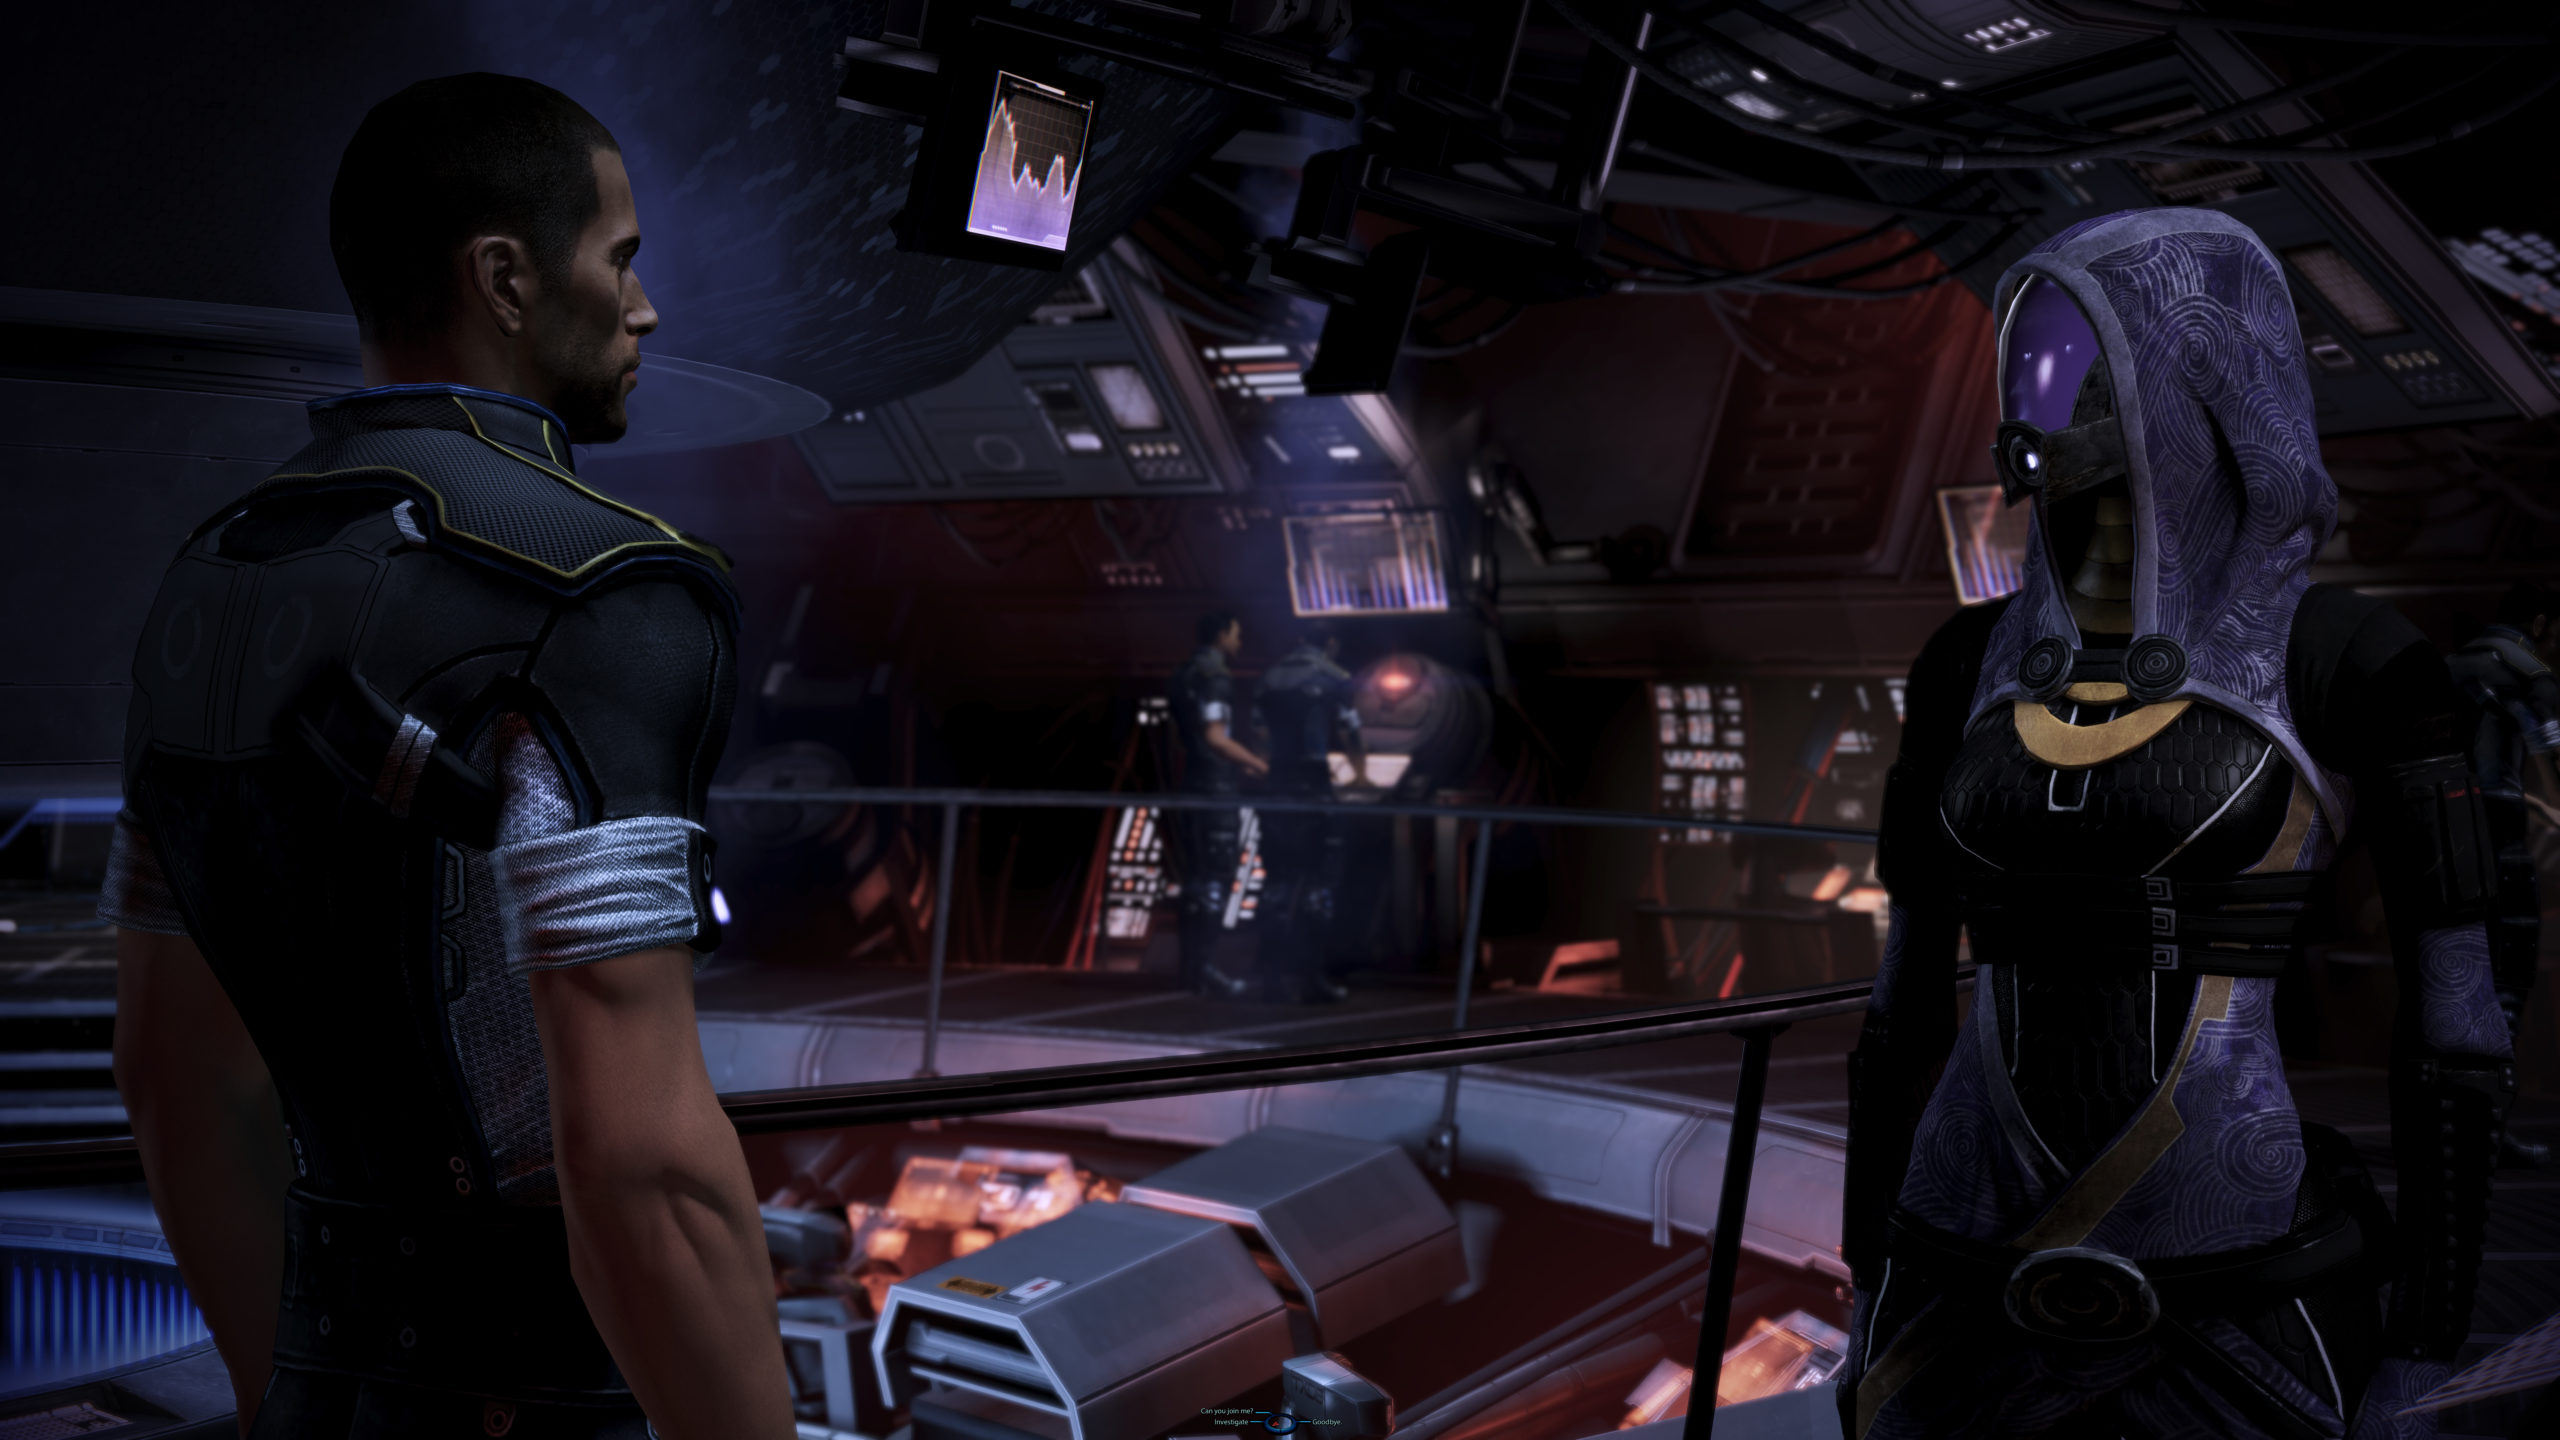 Mass Effect 3 At 8K Resolution Will Make Your PC Weep